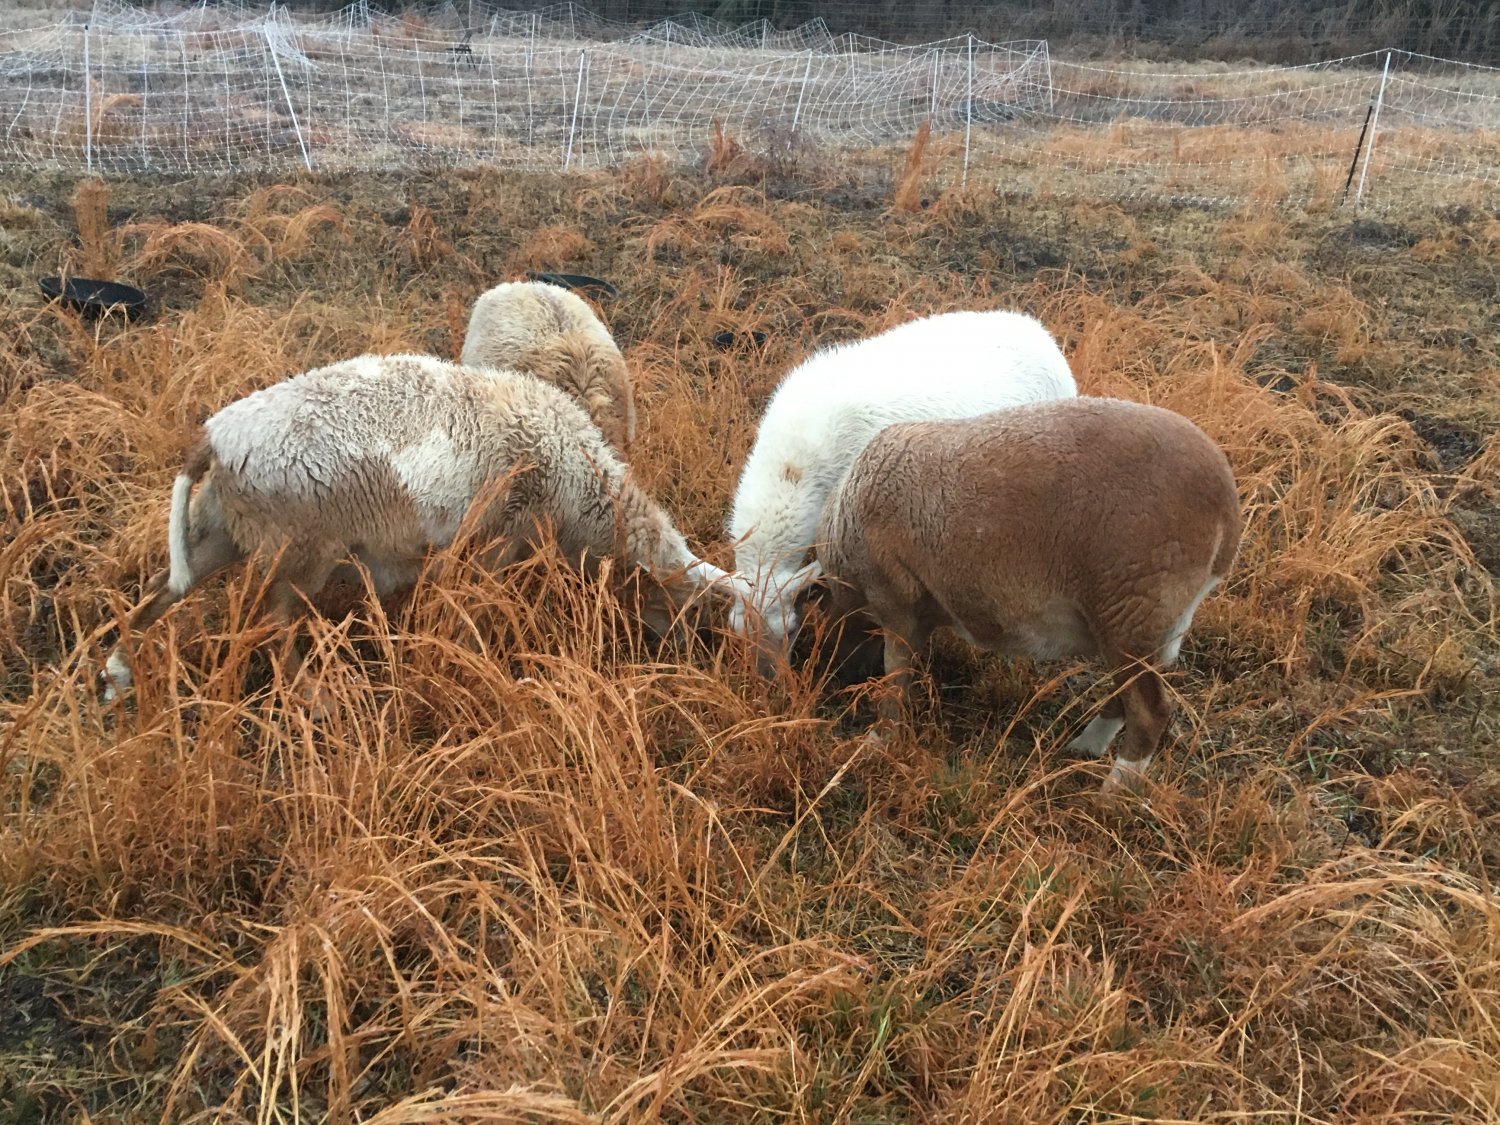 Sheep in the icy grass.JPG